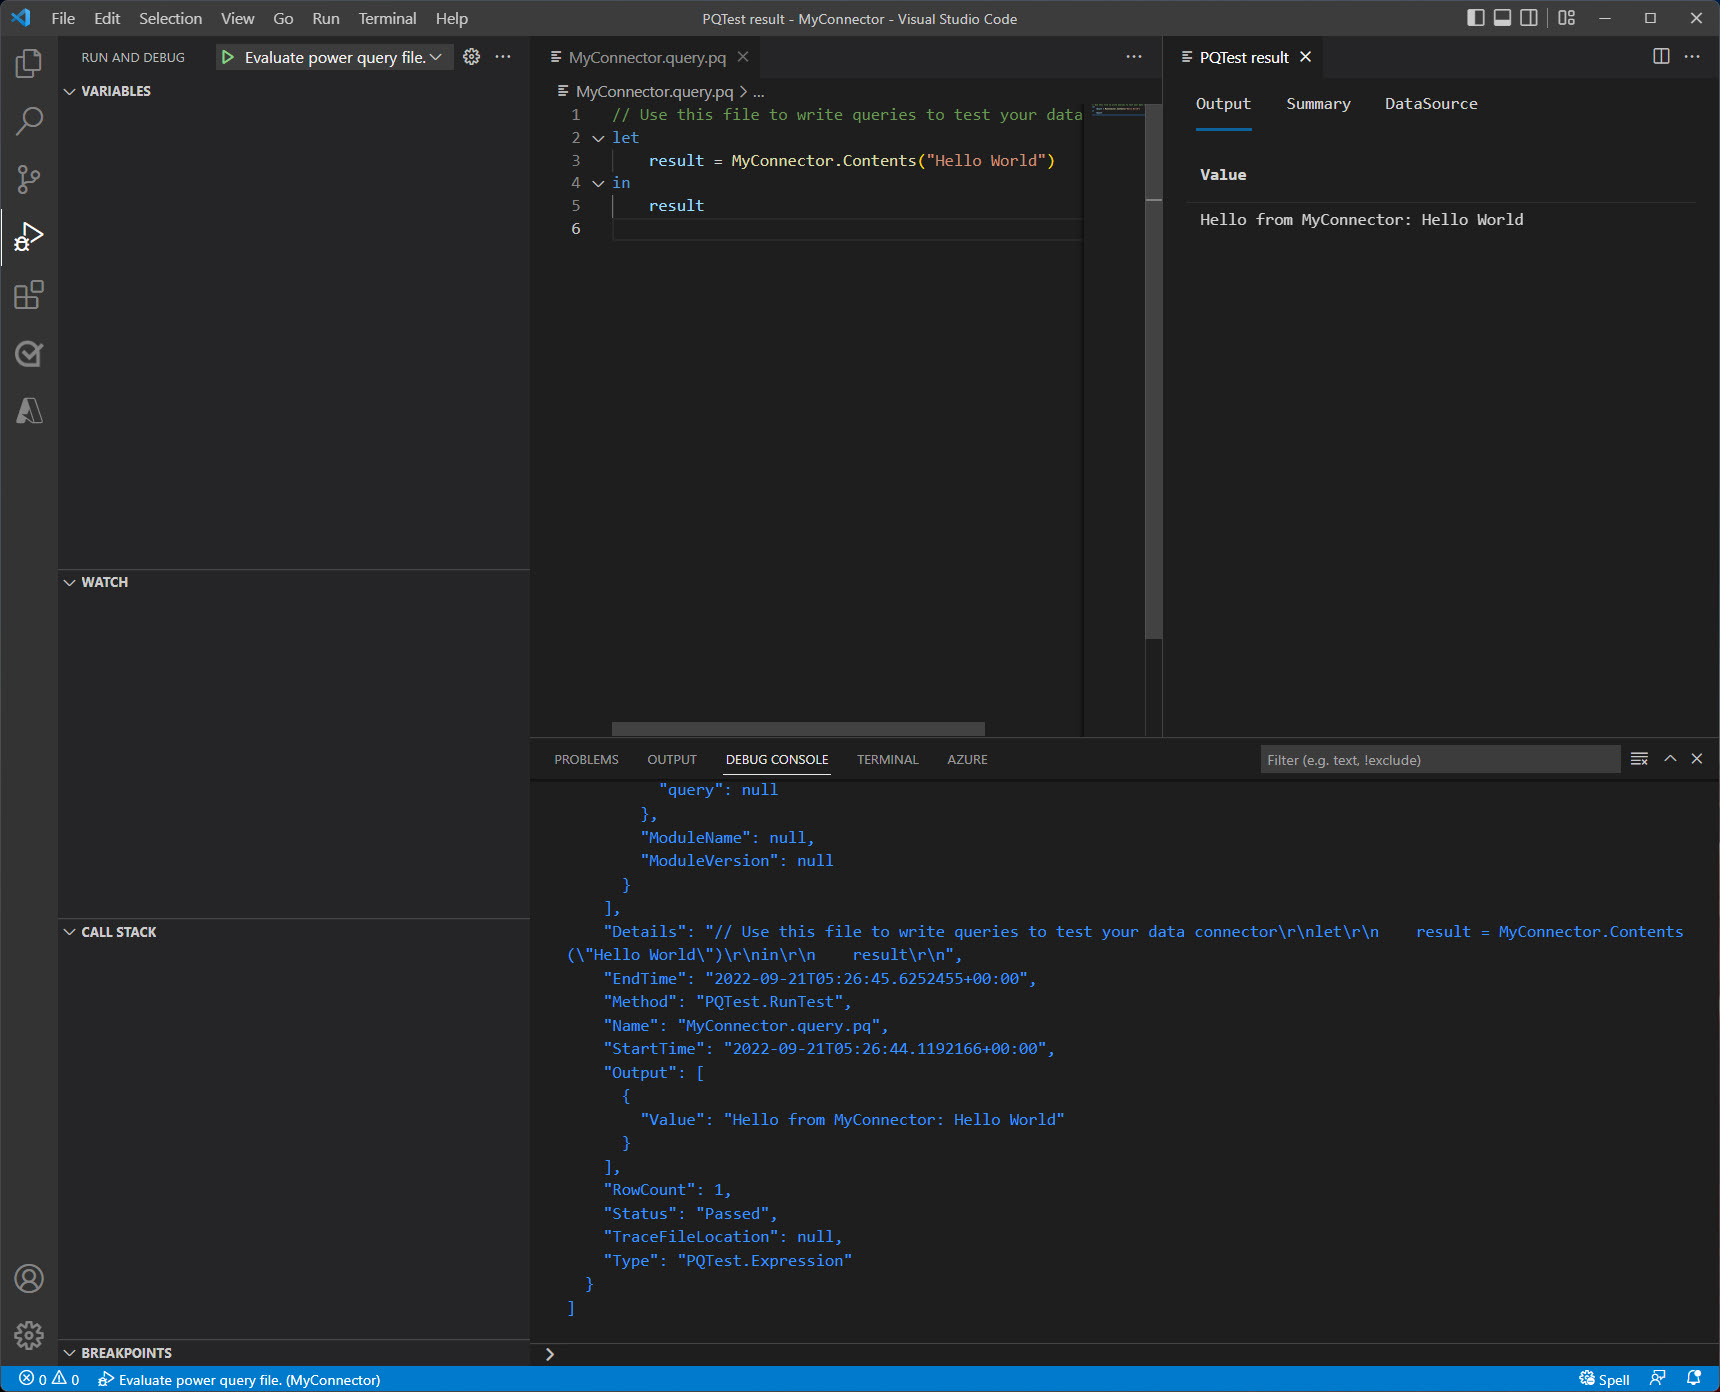 Visual Studio Code window after evaluation has finalized showing the output in the console and the result panel.